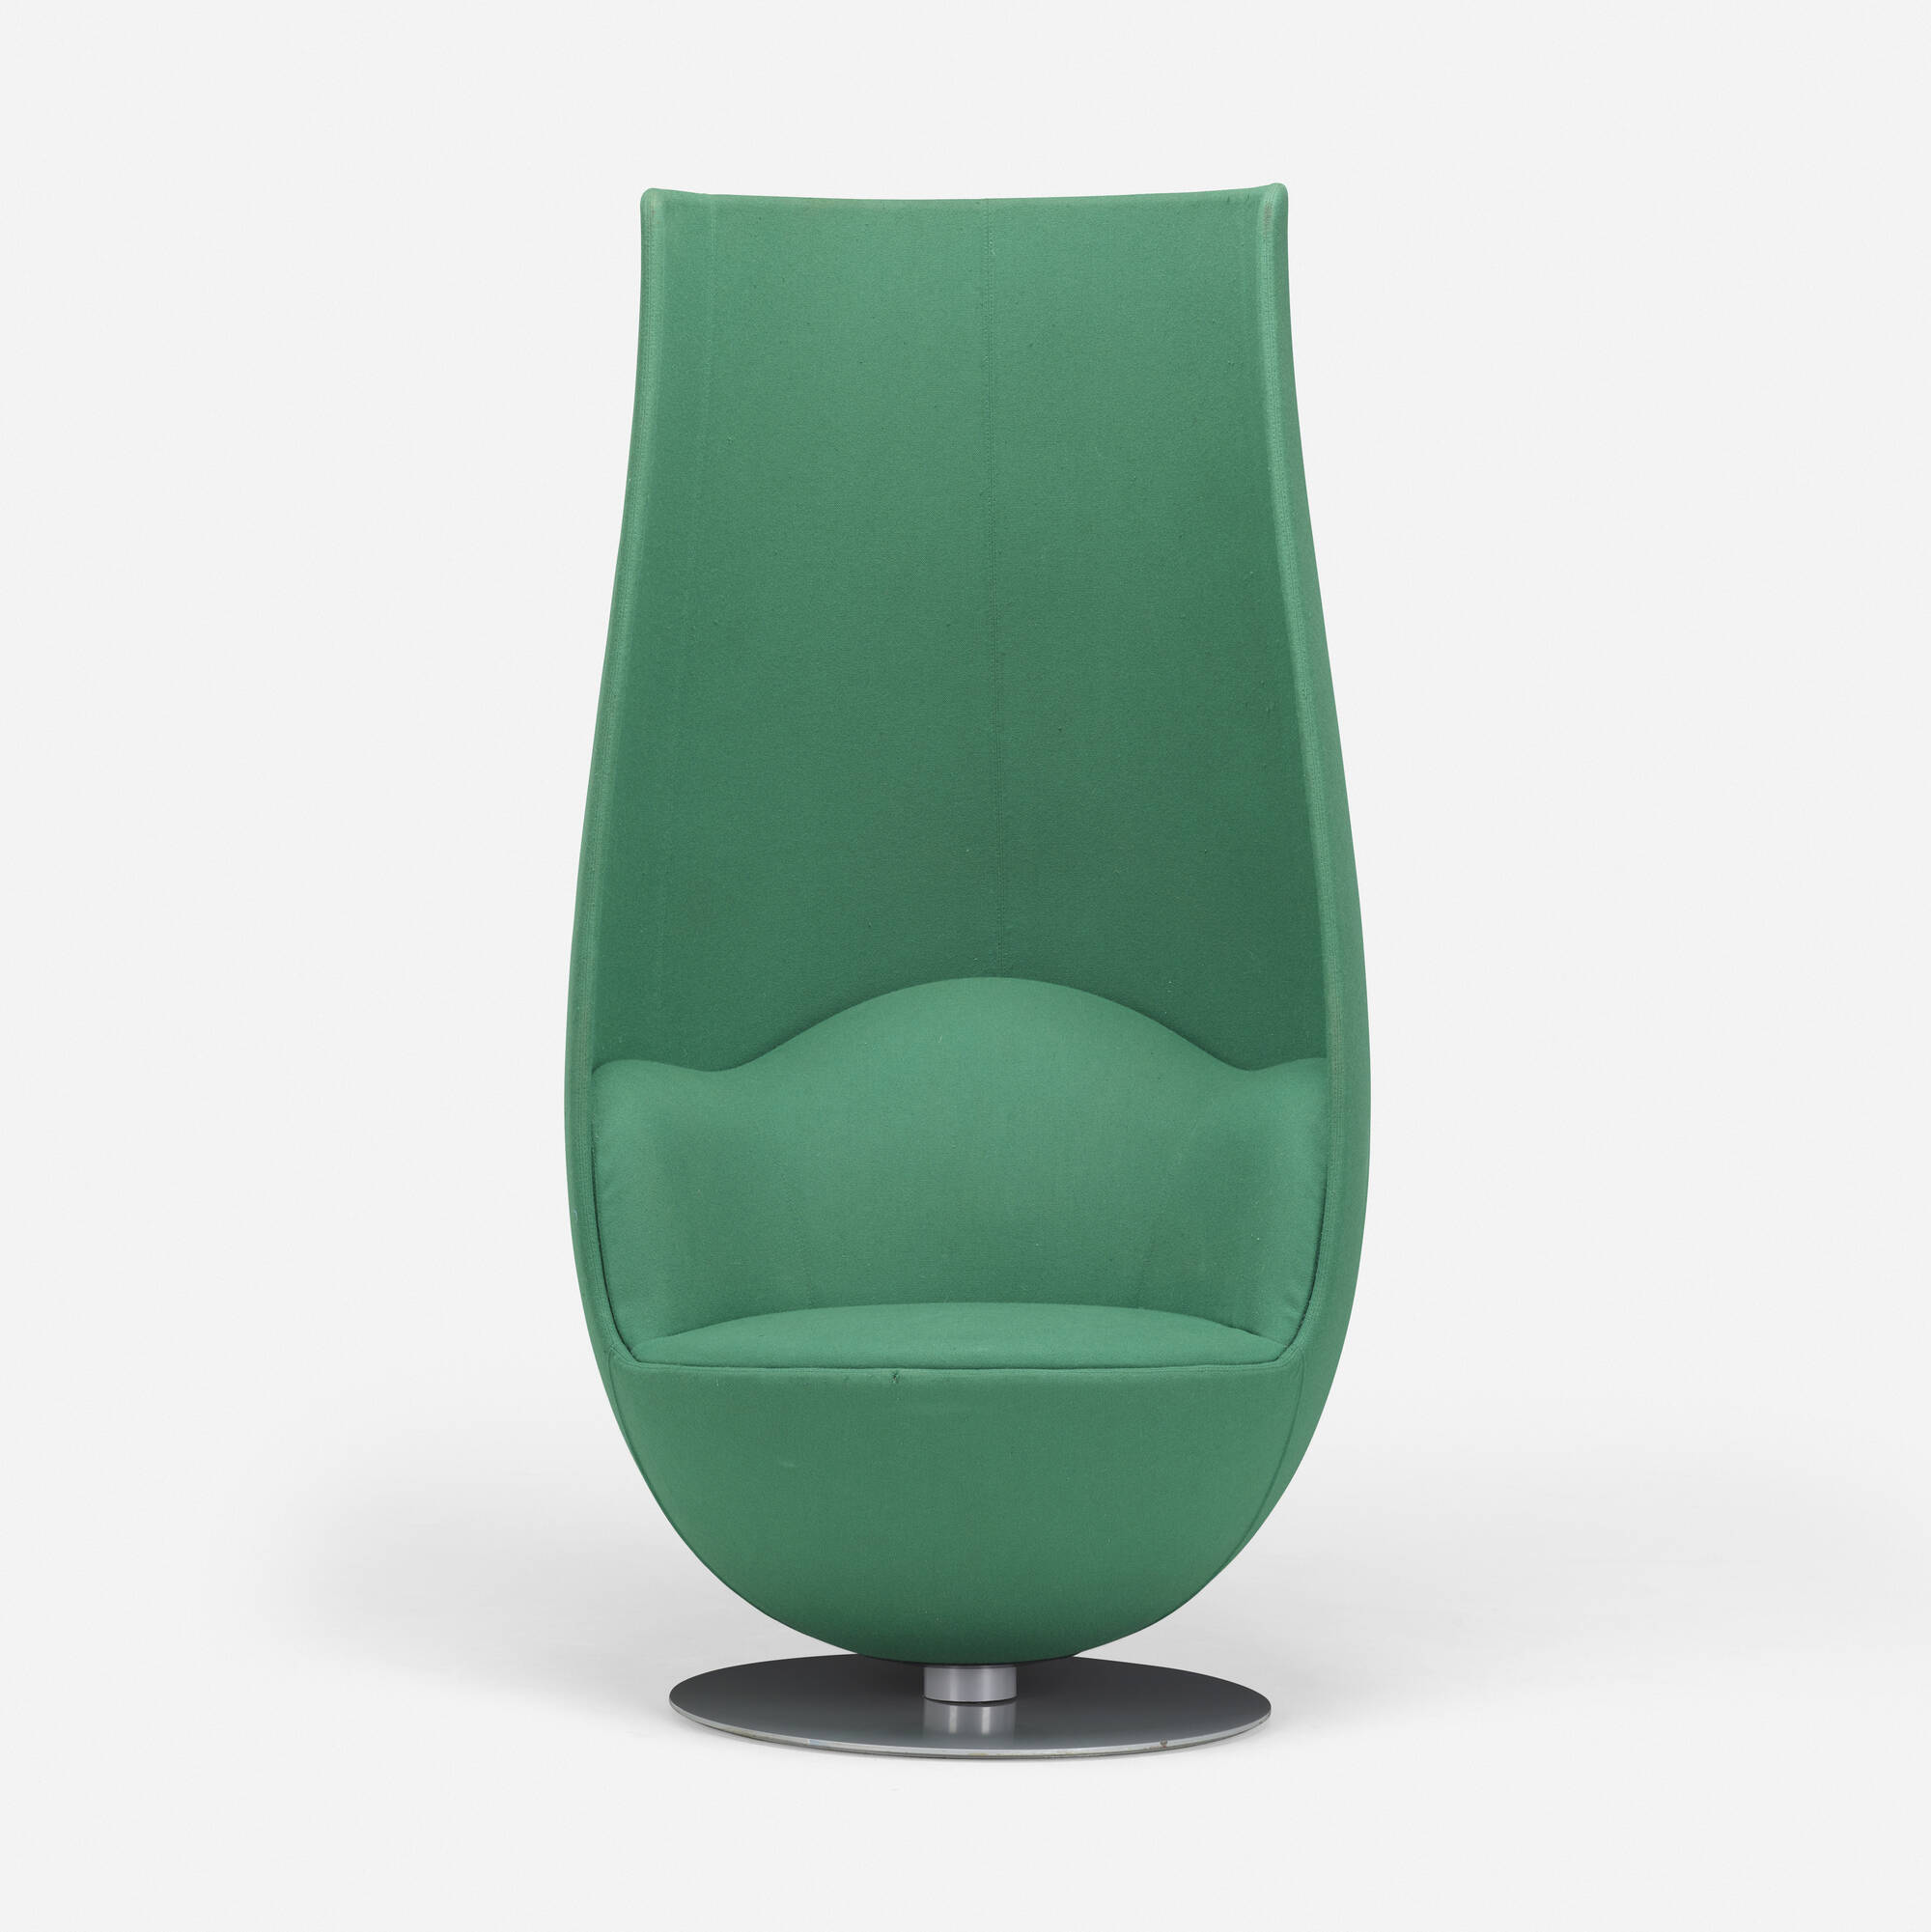 Mobilis 045 Lounge chair by Marcel Wanders